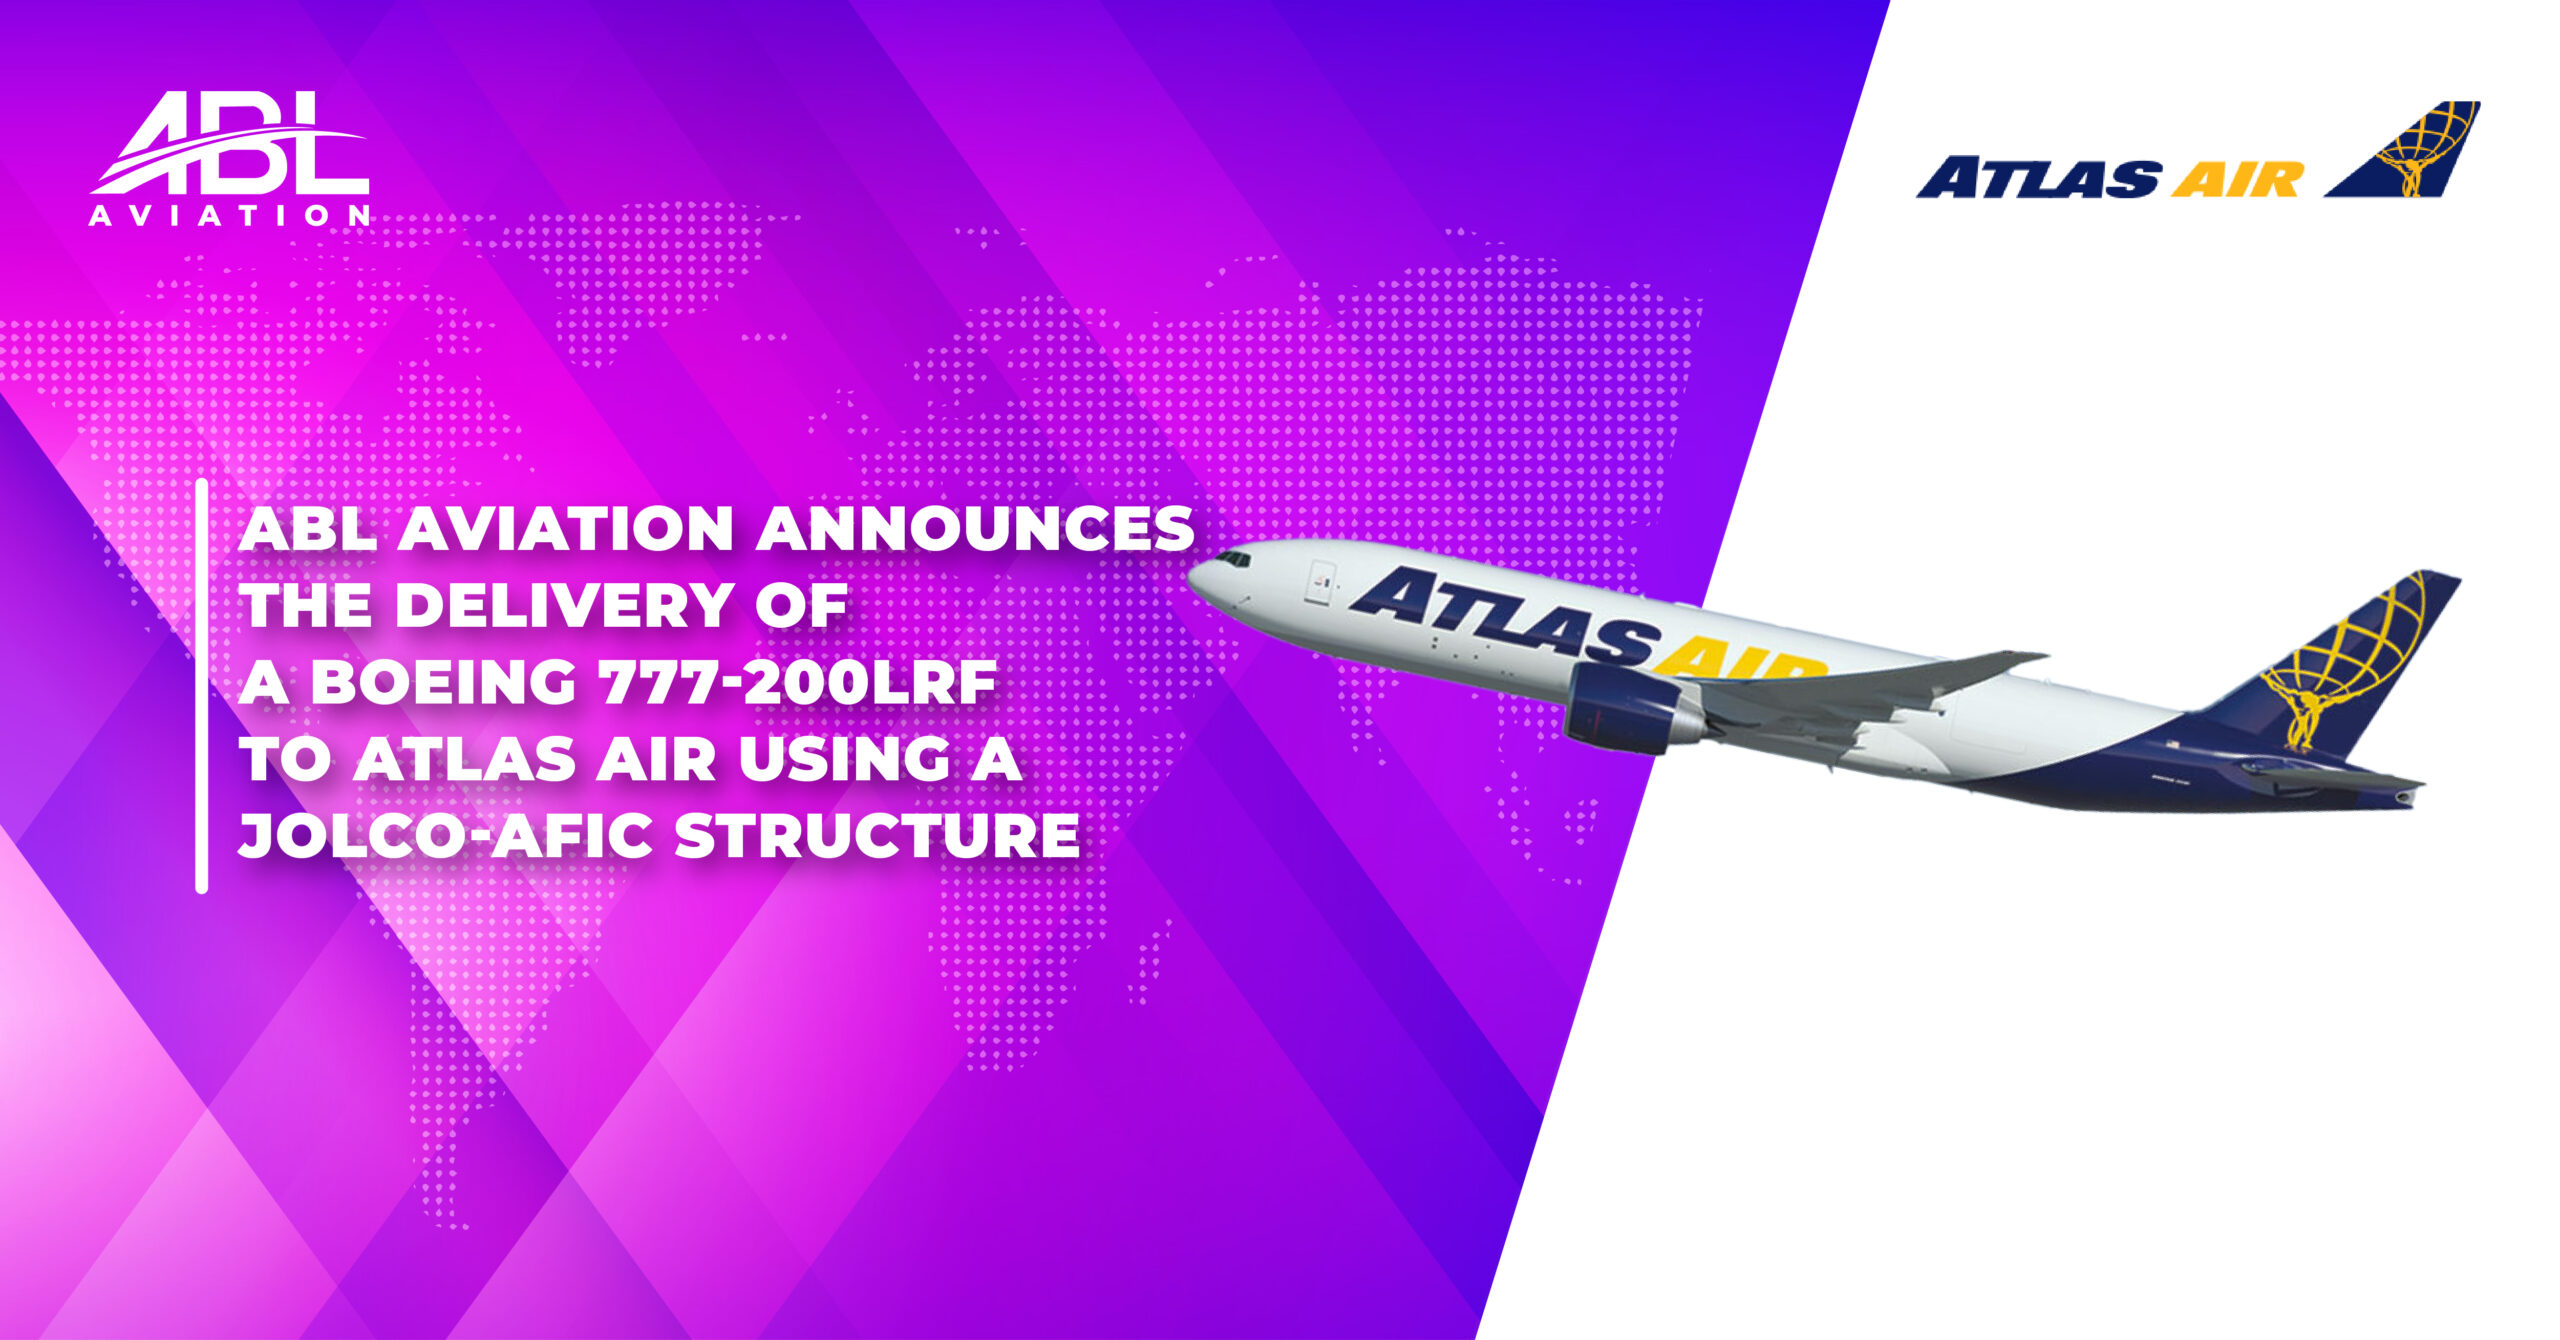 ABL Aviation Announces the Delivery of a Boeing 777-200LRF to Atlas Air Using a JOLCO-AFIC Structure